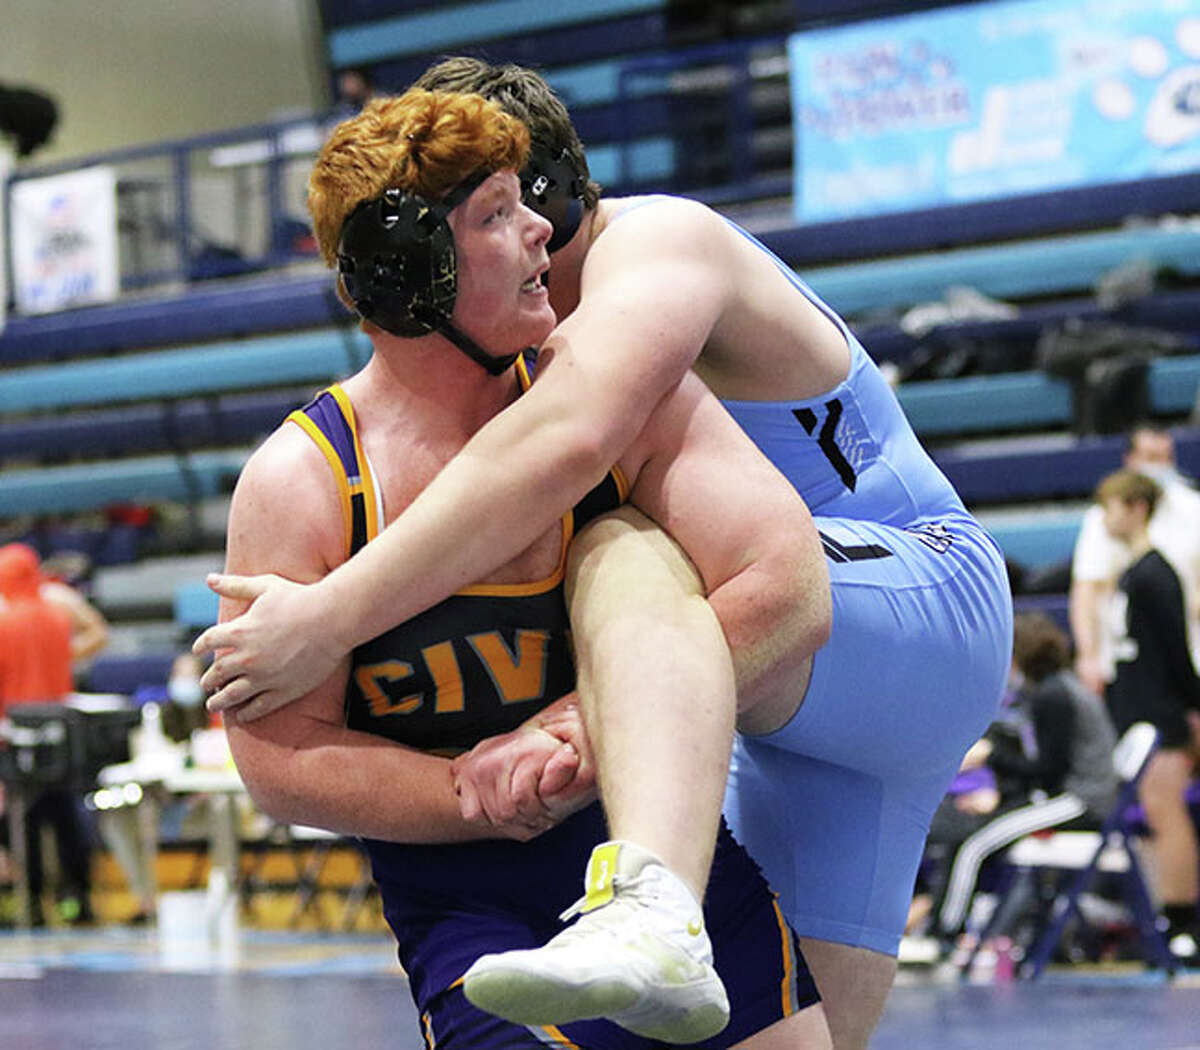 CM heavyweight Logan Cooper looks to the clock as the final seconds tick off in the third period of his match with Jersey's Jaydon Busch. Cooper scored the match-winning points as time expired and finished 5-0 Saturday at the MVC Duals at Havens Gym in Jerseyville.